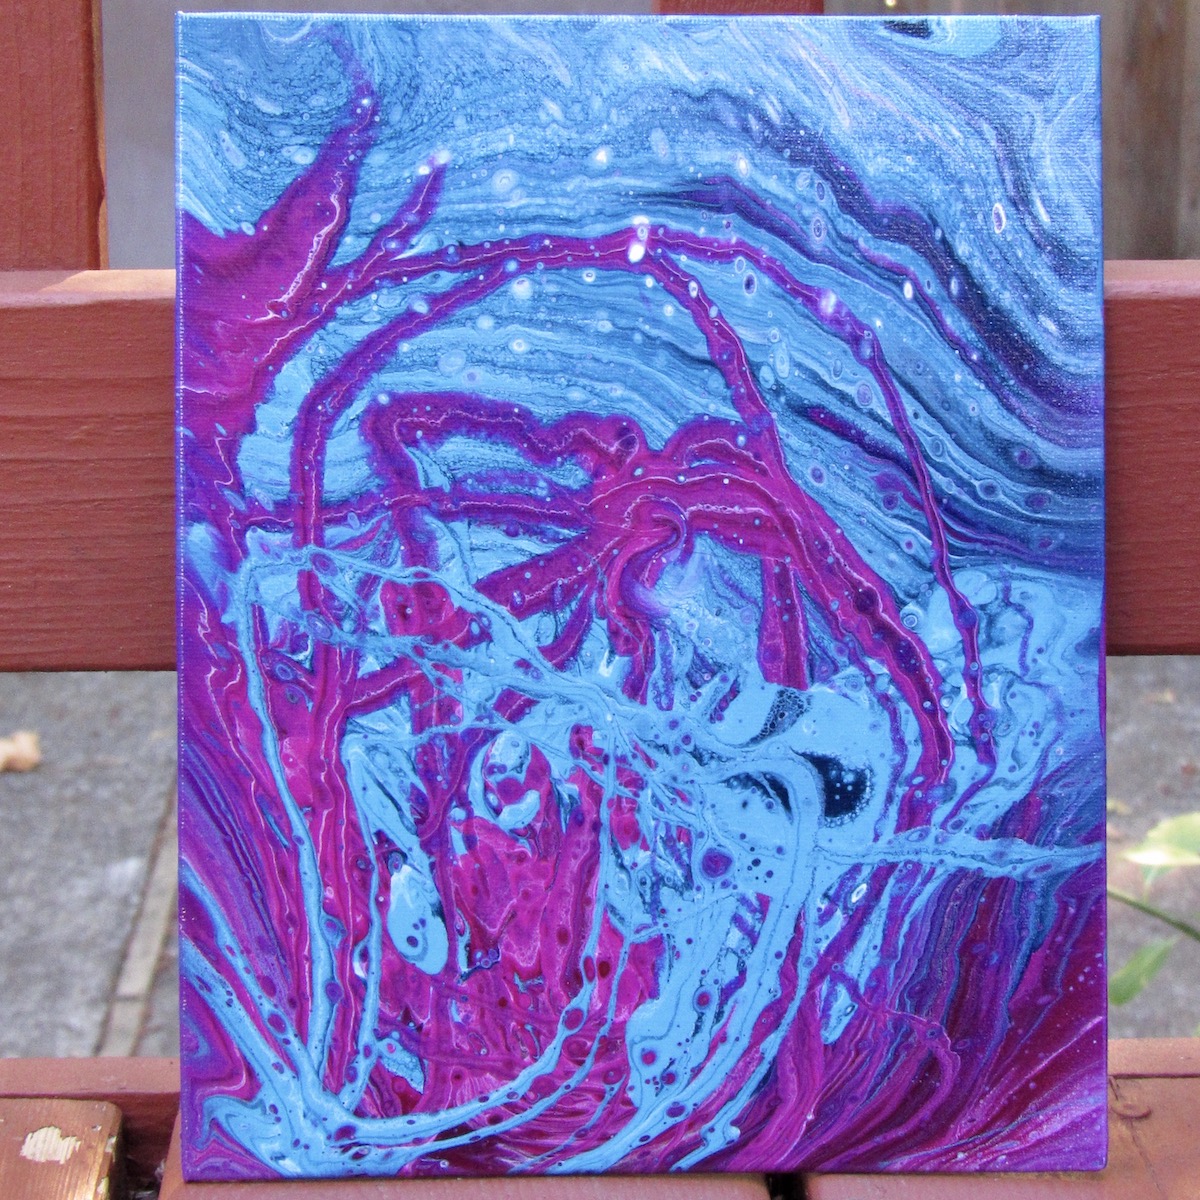 Cotton Candy Acrylic Pour Painting on 8x10 Canvas